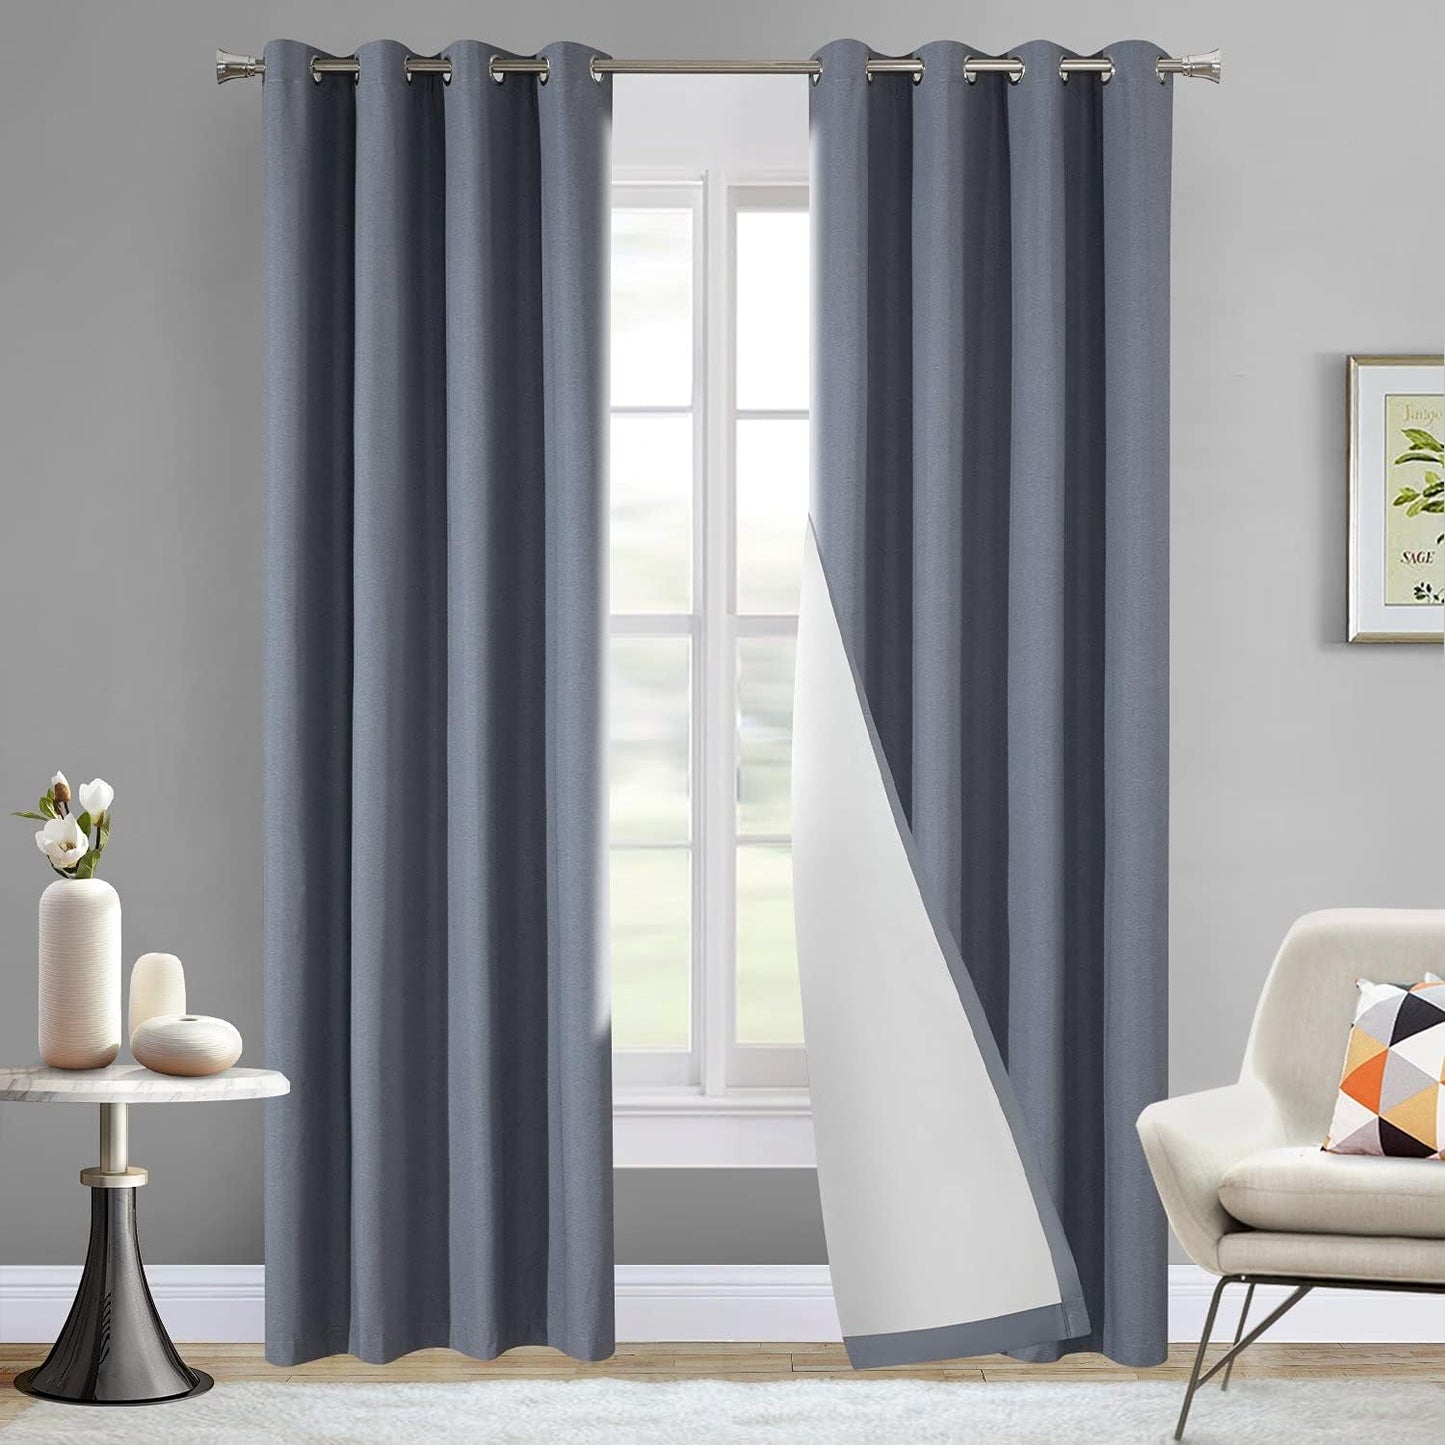 LOYOLADY Dark Grey Blackout Curtains 102 Inches Long 2 Panels Set Thermal Insulated Curtains for Living Room Grommet Noise Reduce Curtains for Bedroom 52" W X 102" L  LoyoLady Home Textiles Haze Blue 100 Blackout Curtains, Grommet 2 X ( 72" W X 84" L ) 